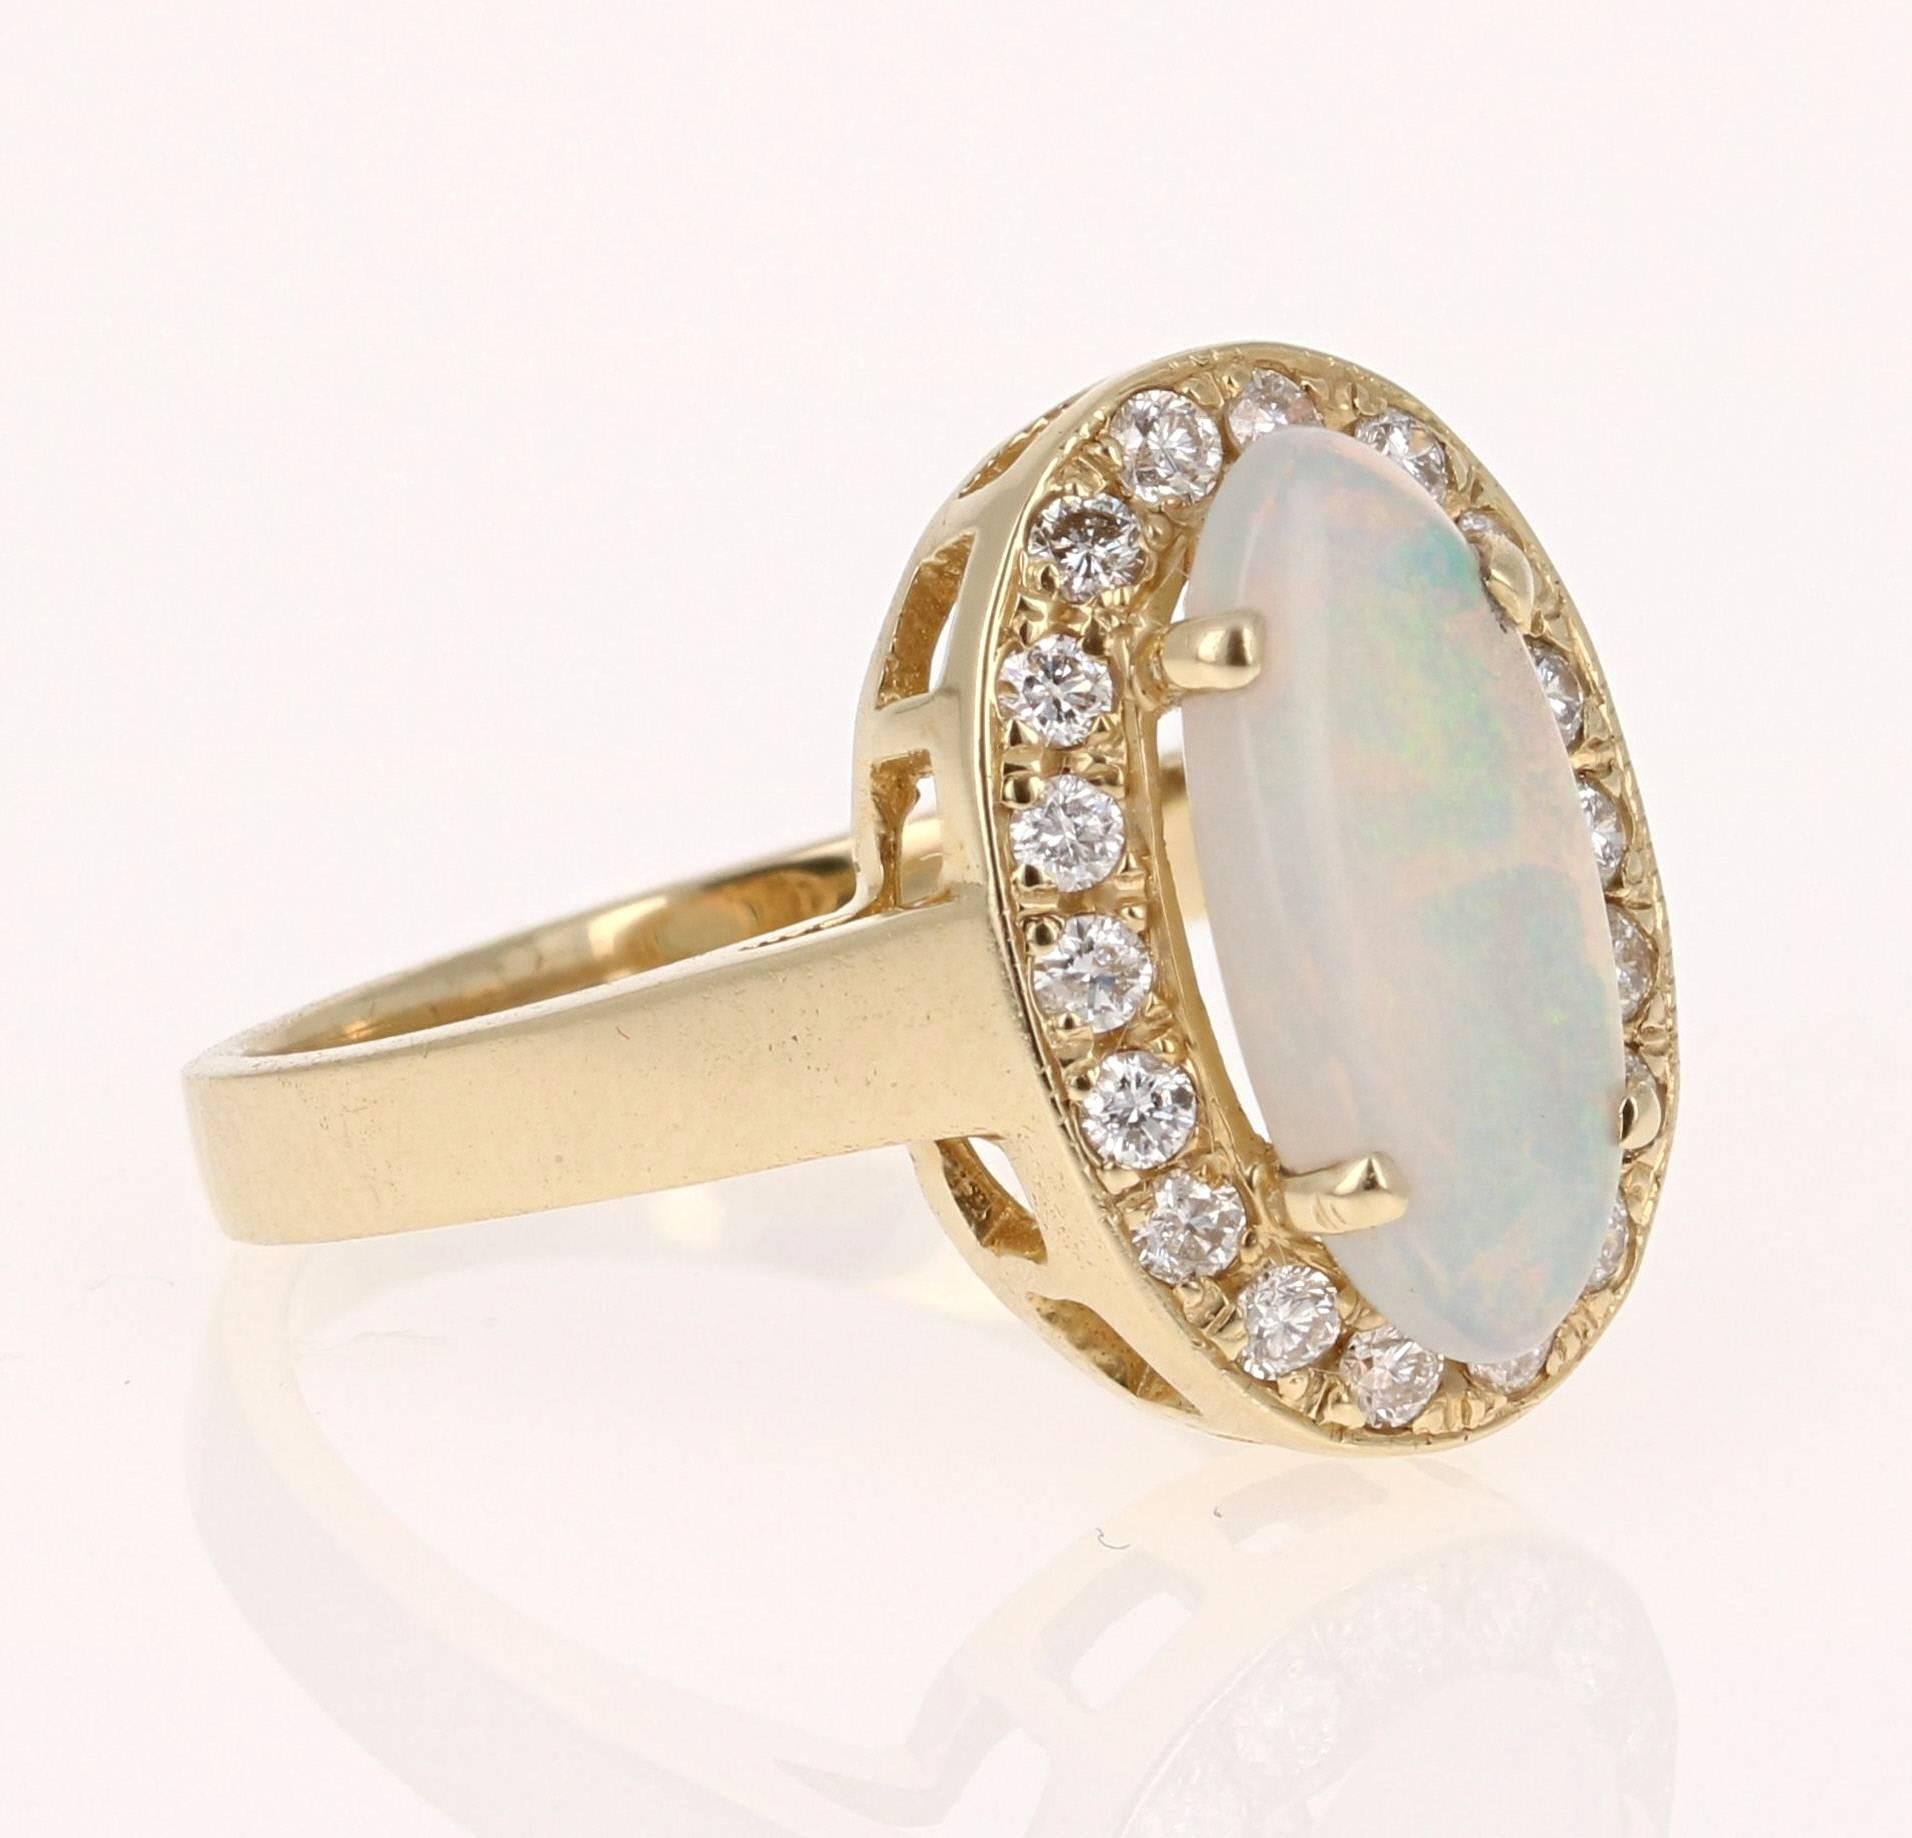 Cute and dainty ring that can be a great addition to anyone's accessory collection!   This ring has a 1.10 carat Oval Cut Opal that is set in the center of the ring and is surrounded by 18 Round Cut Diamonds that weigh 0.39 carats.  The total weight